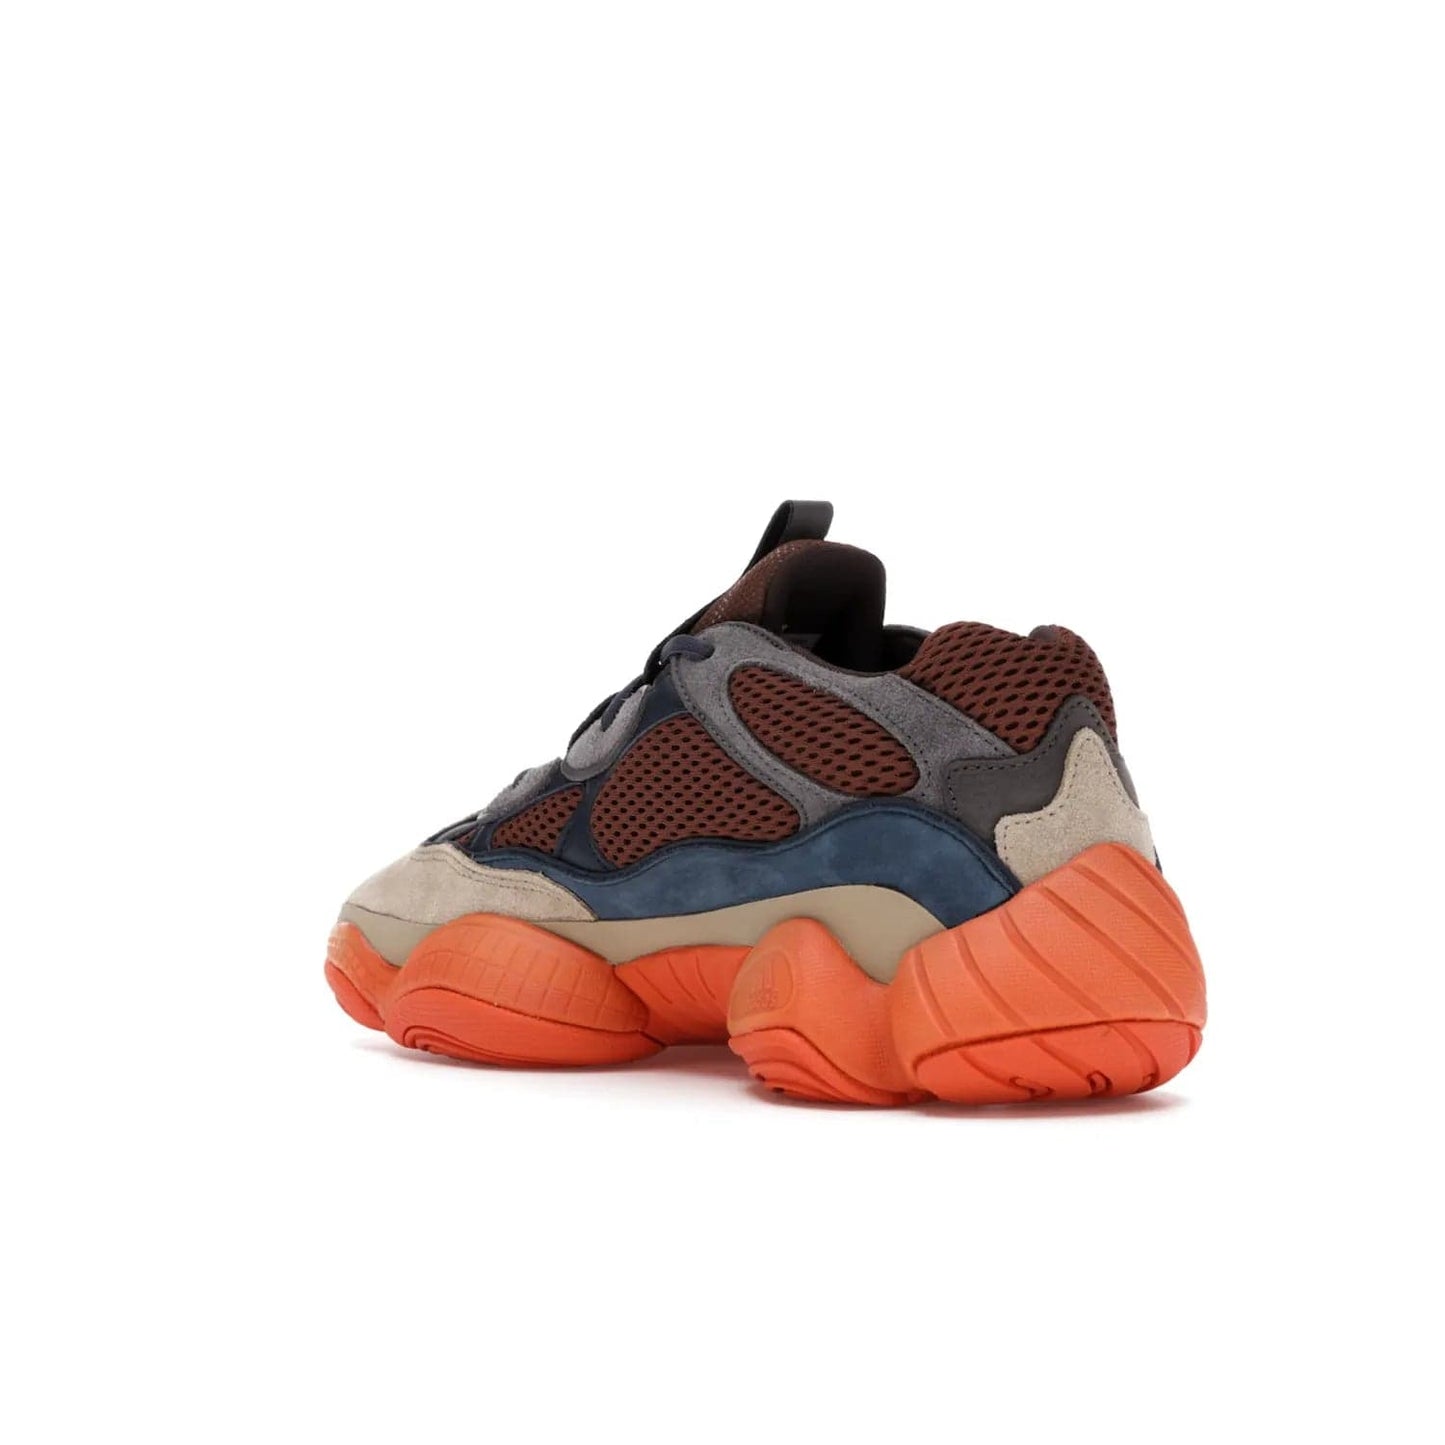 adidas Yeezy 500 Enflame - Image 24 - Only at www.BallersClubKickz.com - Step into style with the adidas Yeezy 500 Enflame. Mix of mesh, leather, and suede layered together to create tonal-brown, dark blue, & orange. Orange AdiPRENE sole provides superior cushioning & comfort. Get yours and experience maximum style.